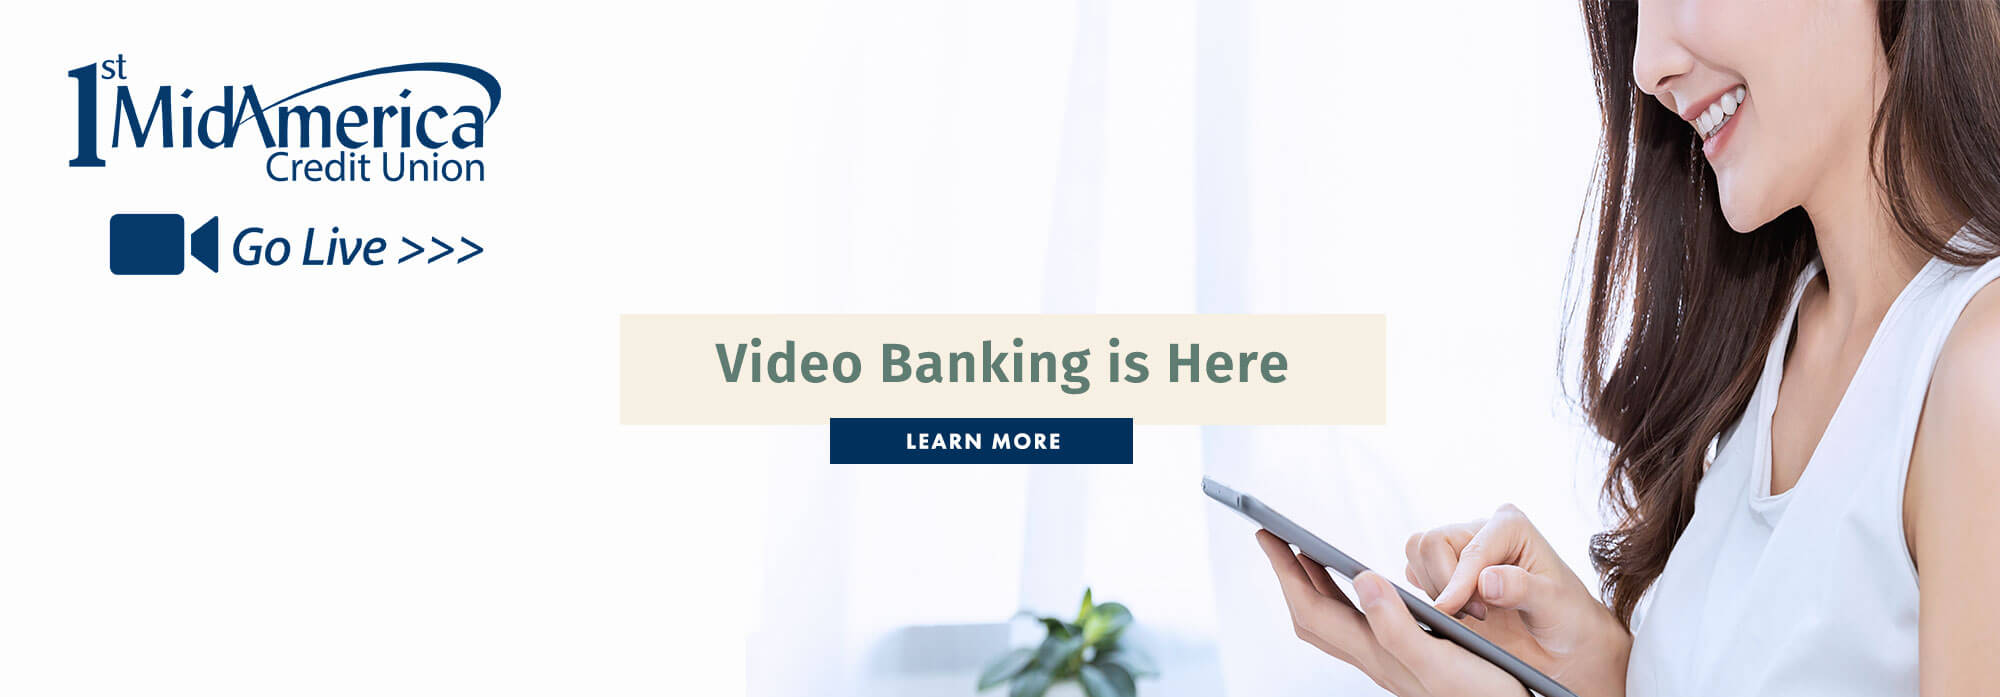 Video Banking is Here